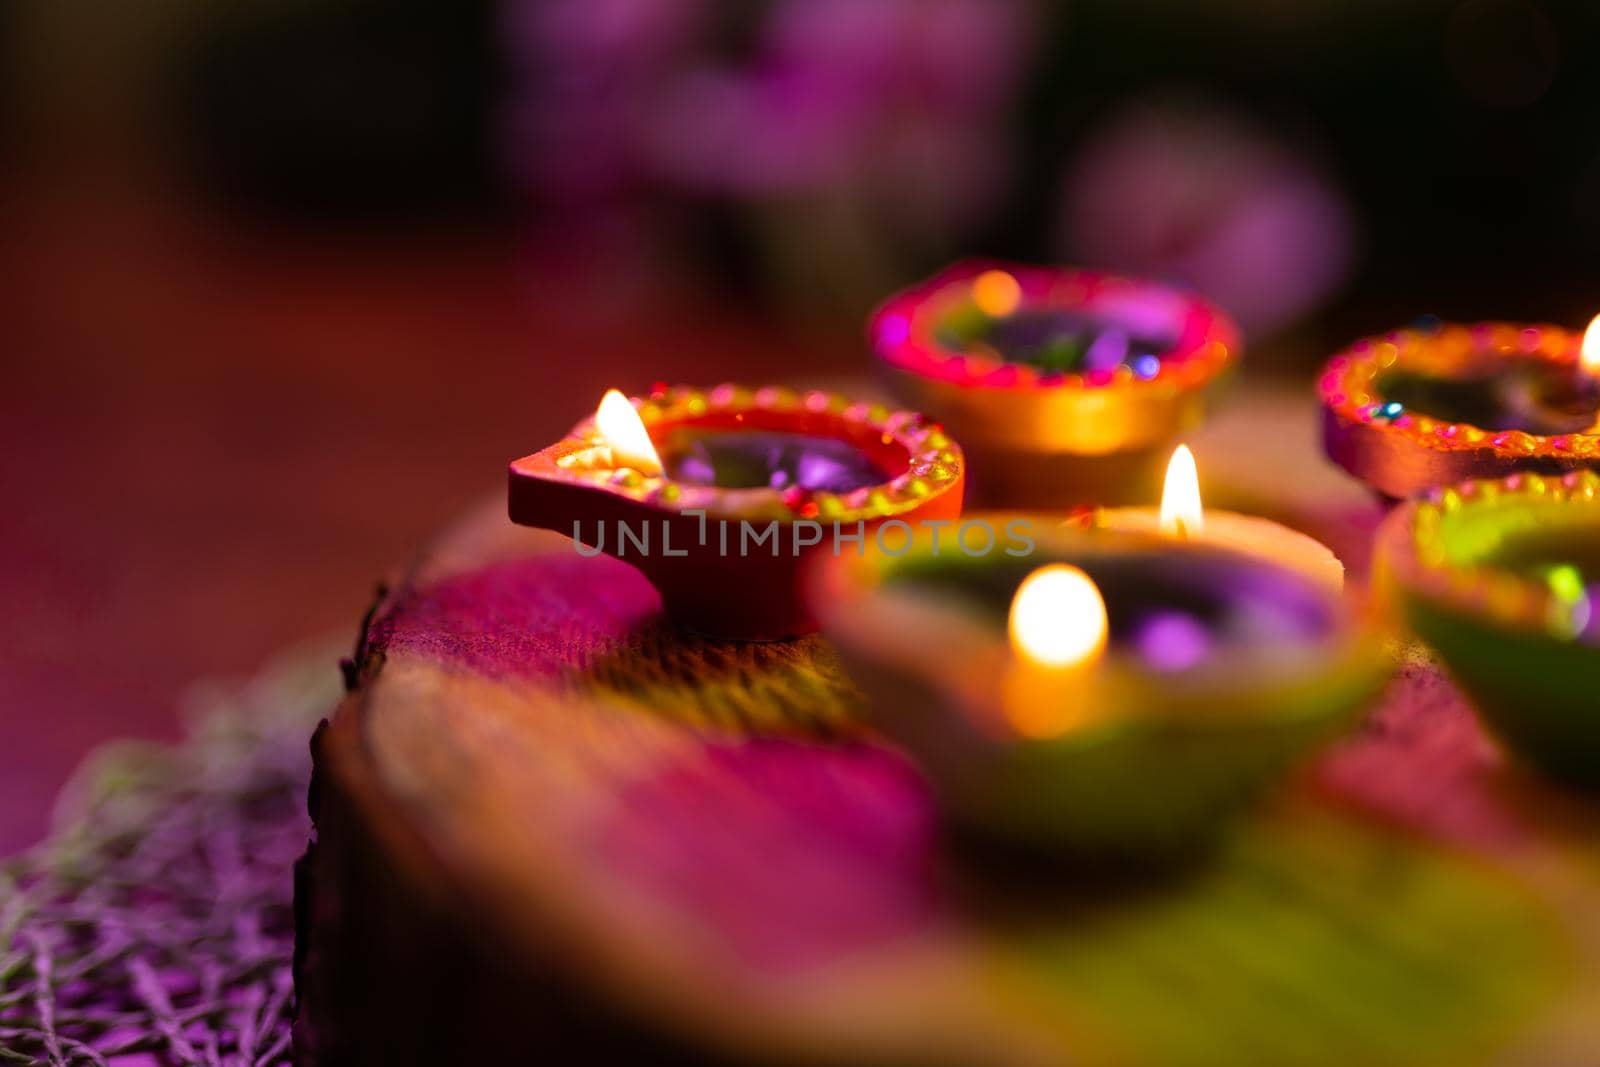 Four lit candles in small decorative clay pots and tea light candle burning on round wooden board. celebration, religion, tradition and ceremony concept.